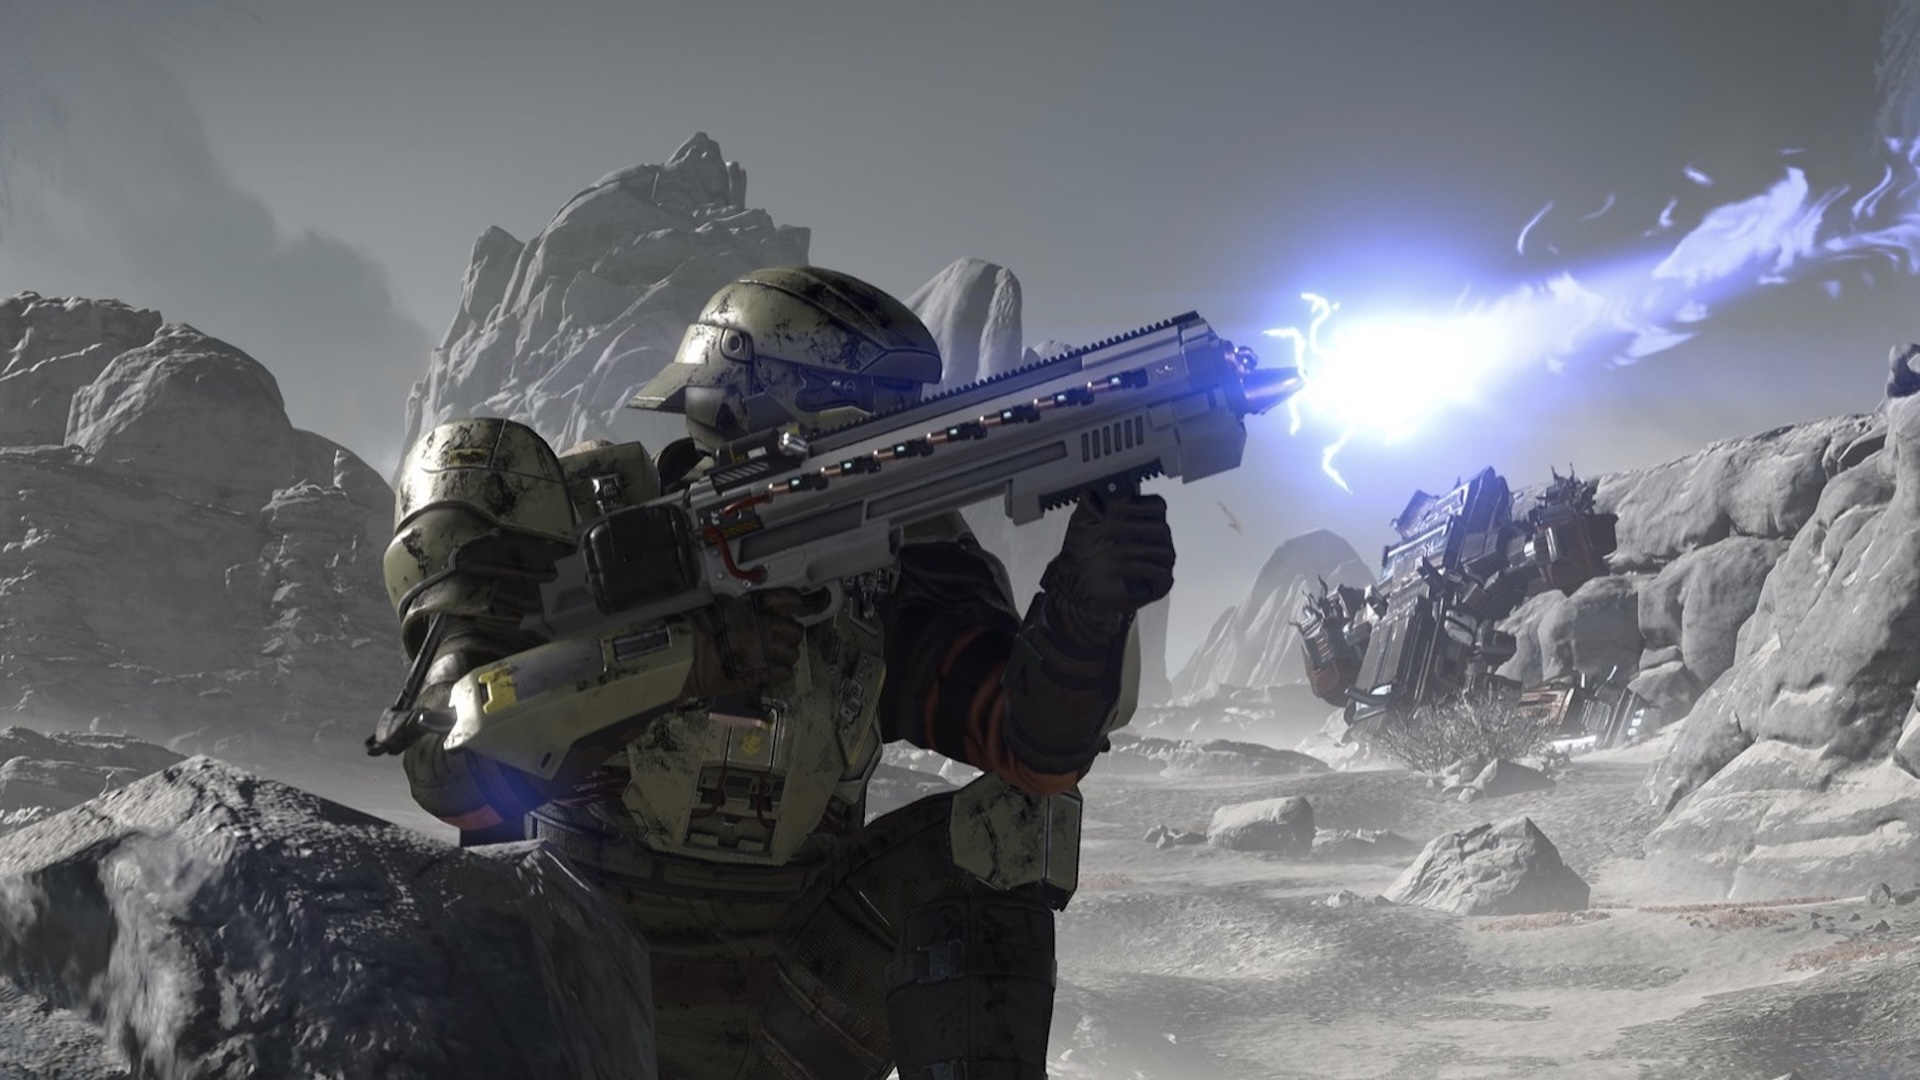 A Helldivers fires the new LAS-16 Sickle laser rifle to the right of the image. Blue sparks shoot from the end of the gun